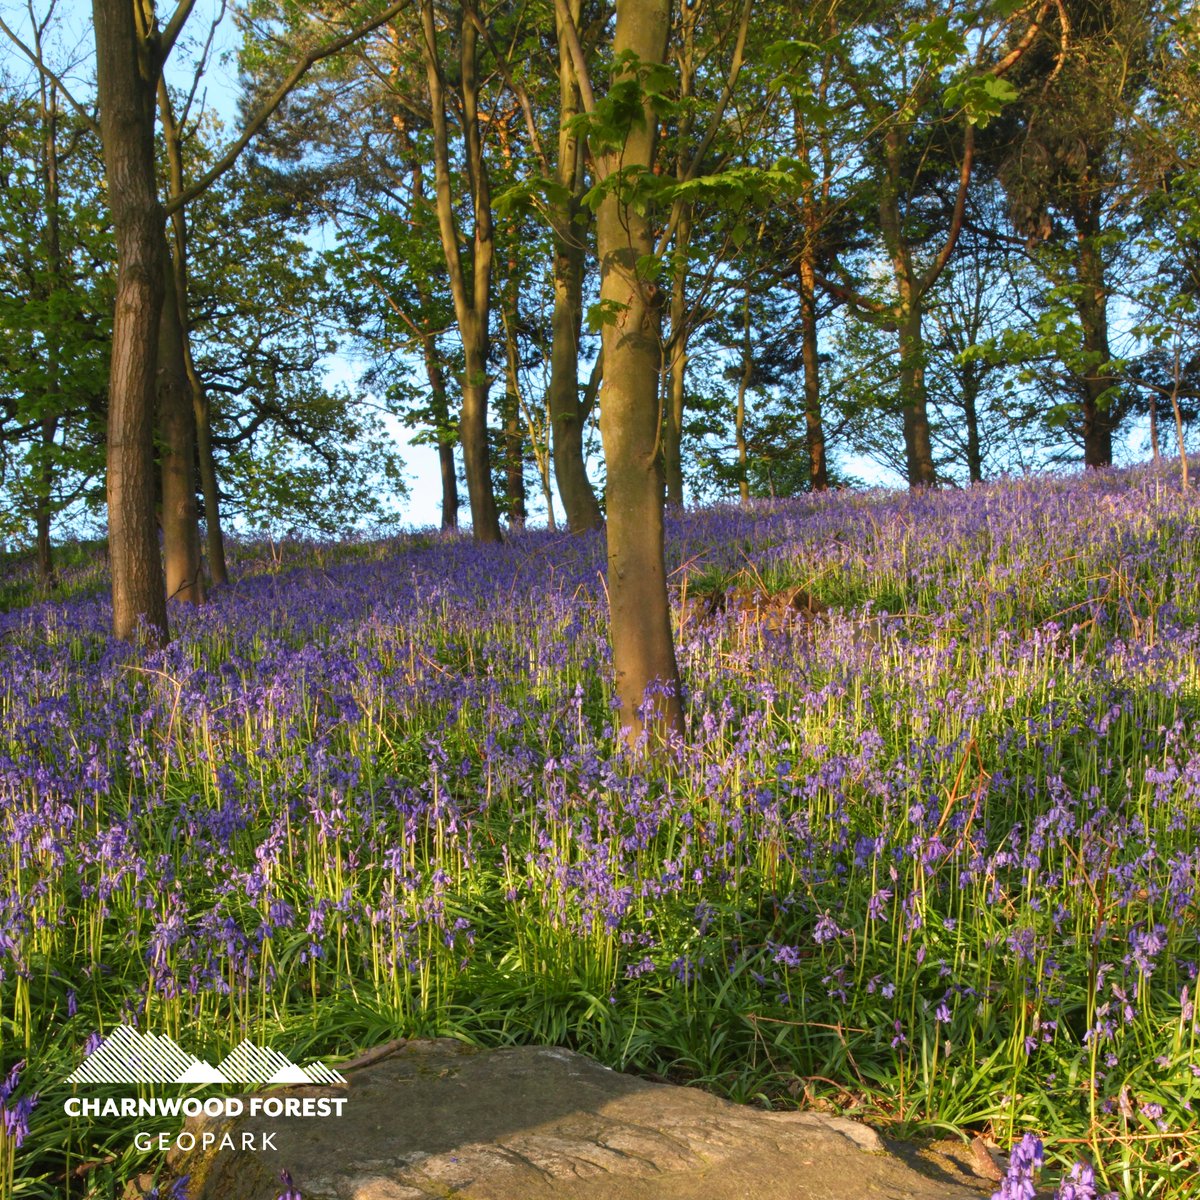 💜 Who's ready for the bluebells!? ❓ Did you know around half the world's bluebells are found in the UK? Be sure to visit one of Charnwood Forest's woodland sites to see them this spring!